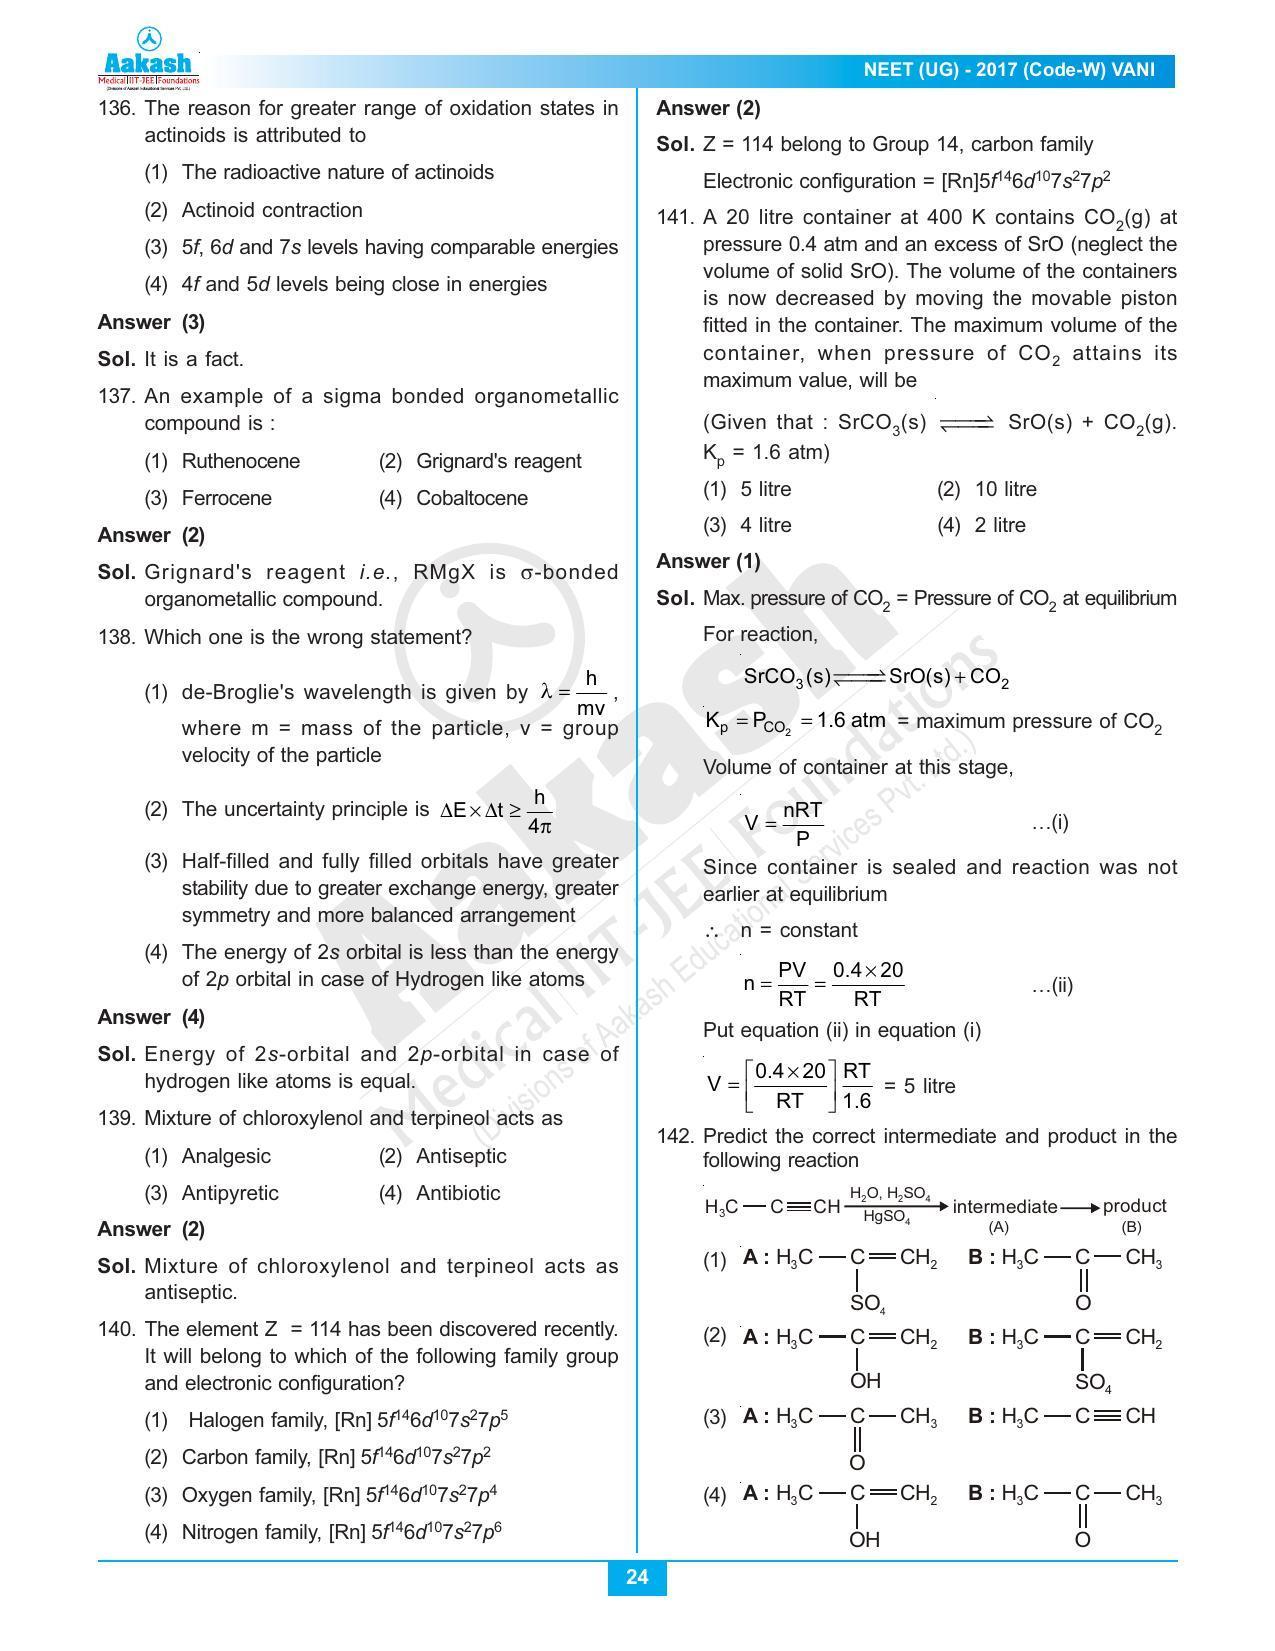  NEET Code W 2017 Answer & Solutions - Page 24